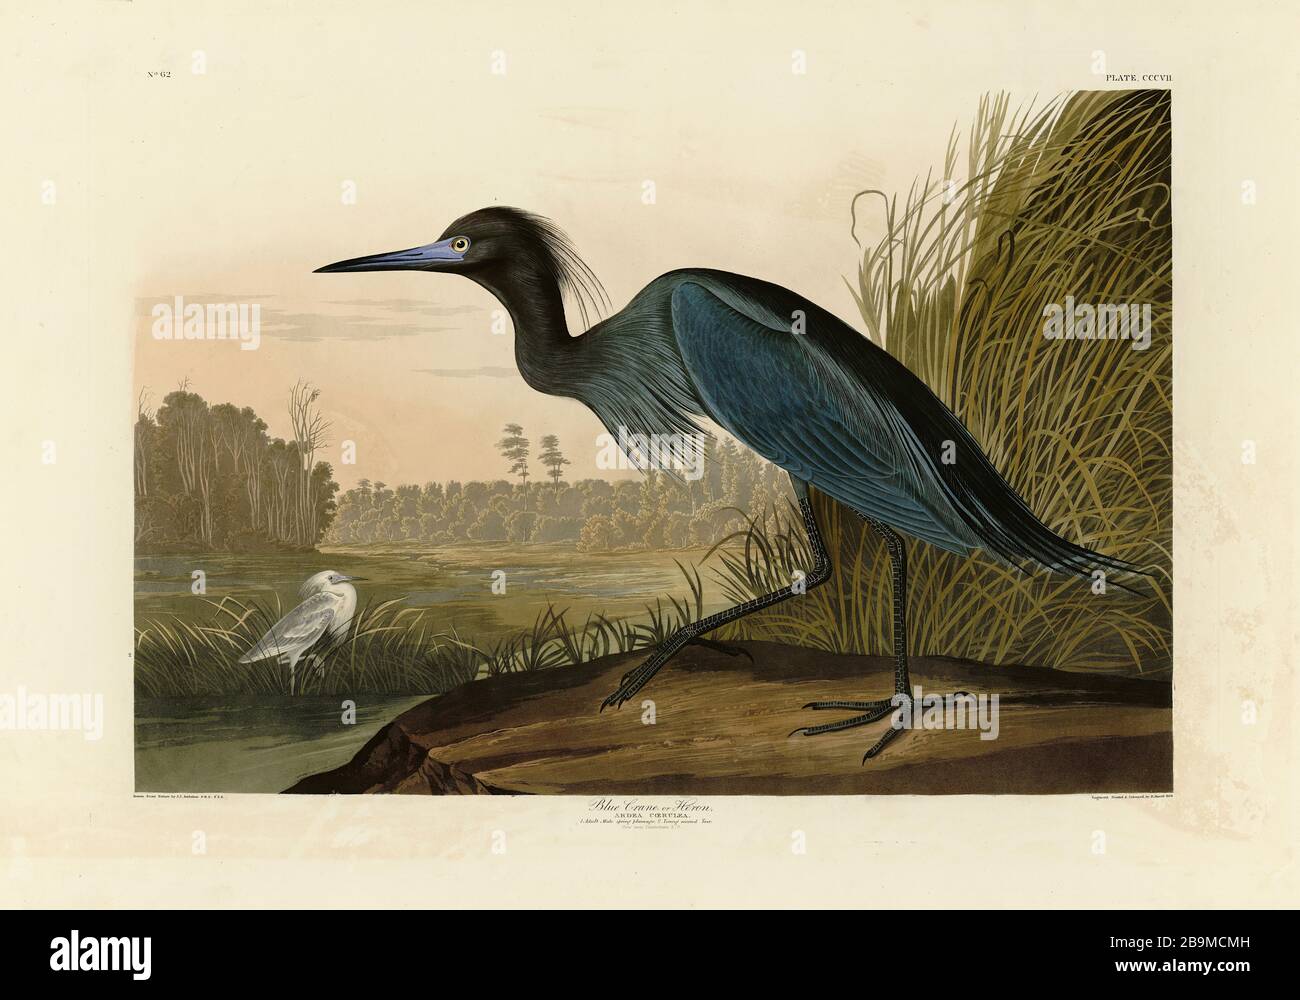 Plate 307 Blue Crane or Heron from The Birds of America folio (1827–1839) by John James Audubon - Very high resolution and quality edited image Stock Photo